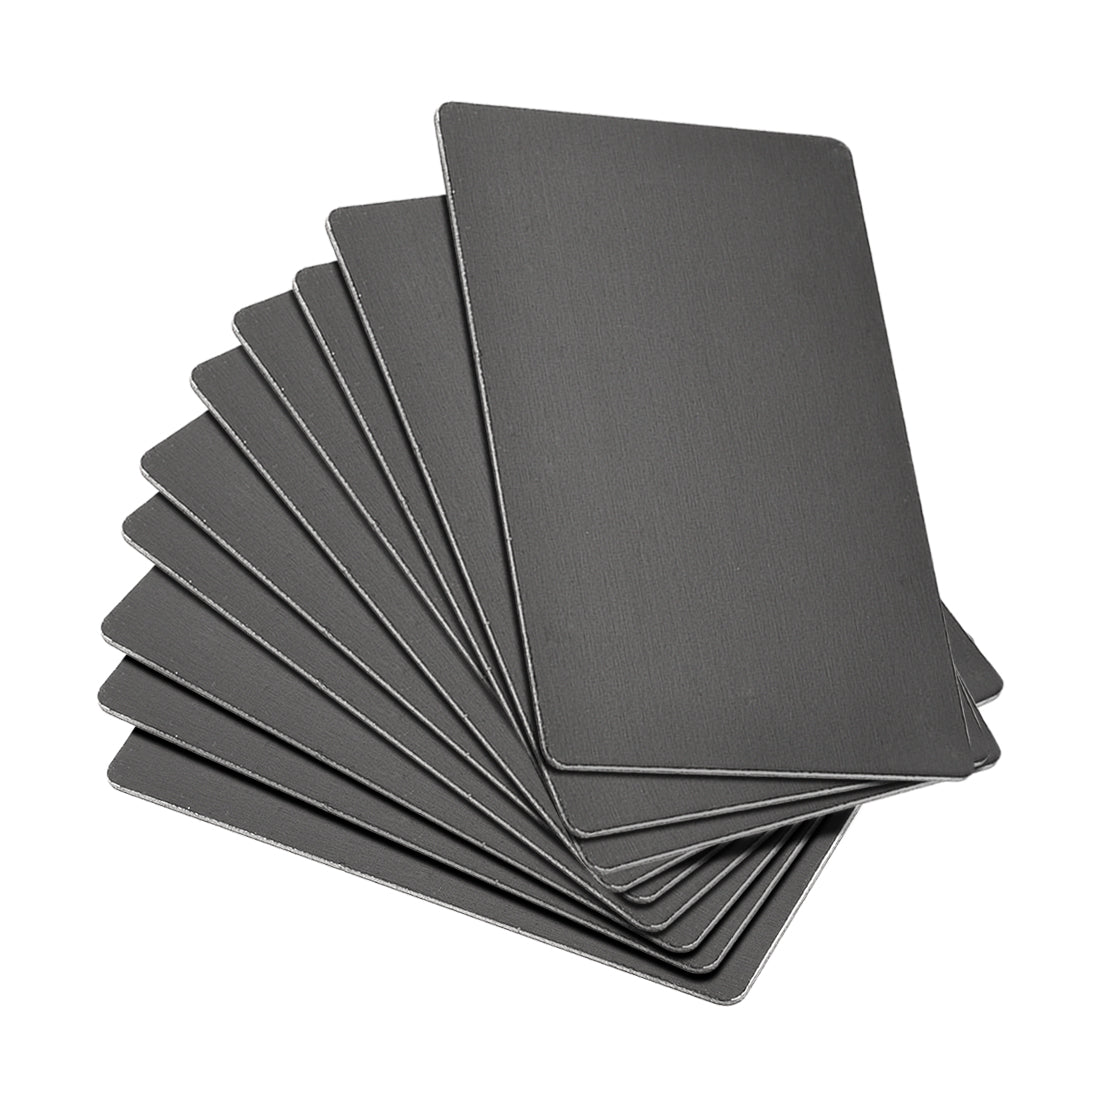 uxcell Uxcell Blank Metal Card, Anodized Aluminum Plate for DIY Laser Printing